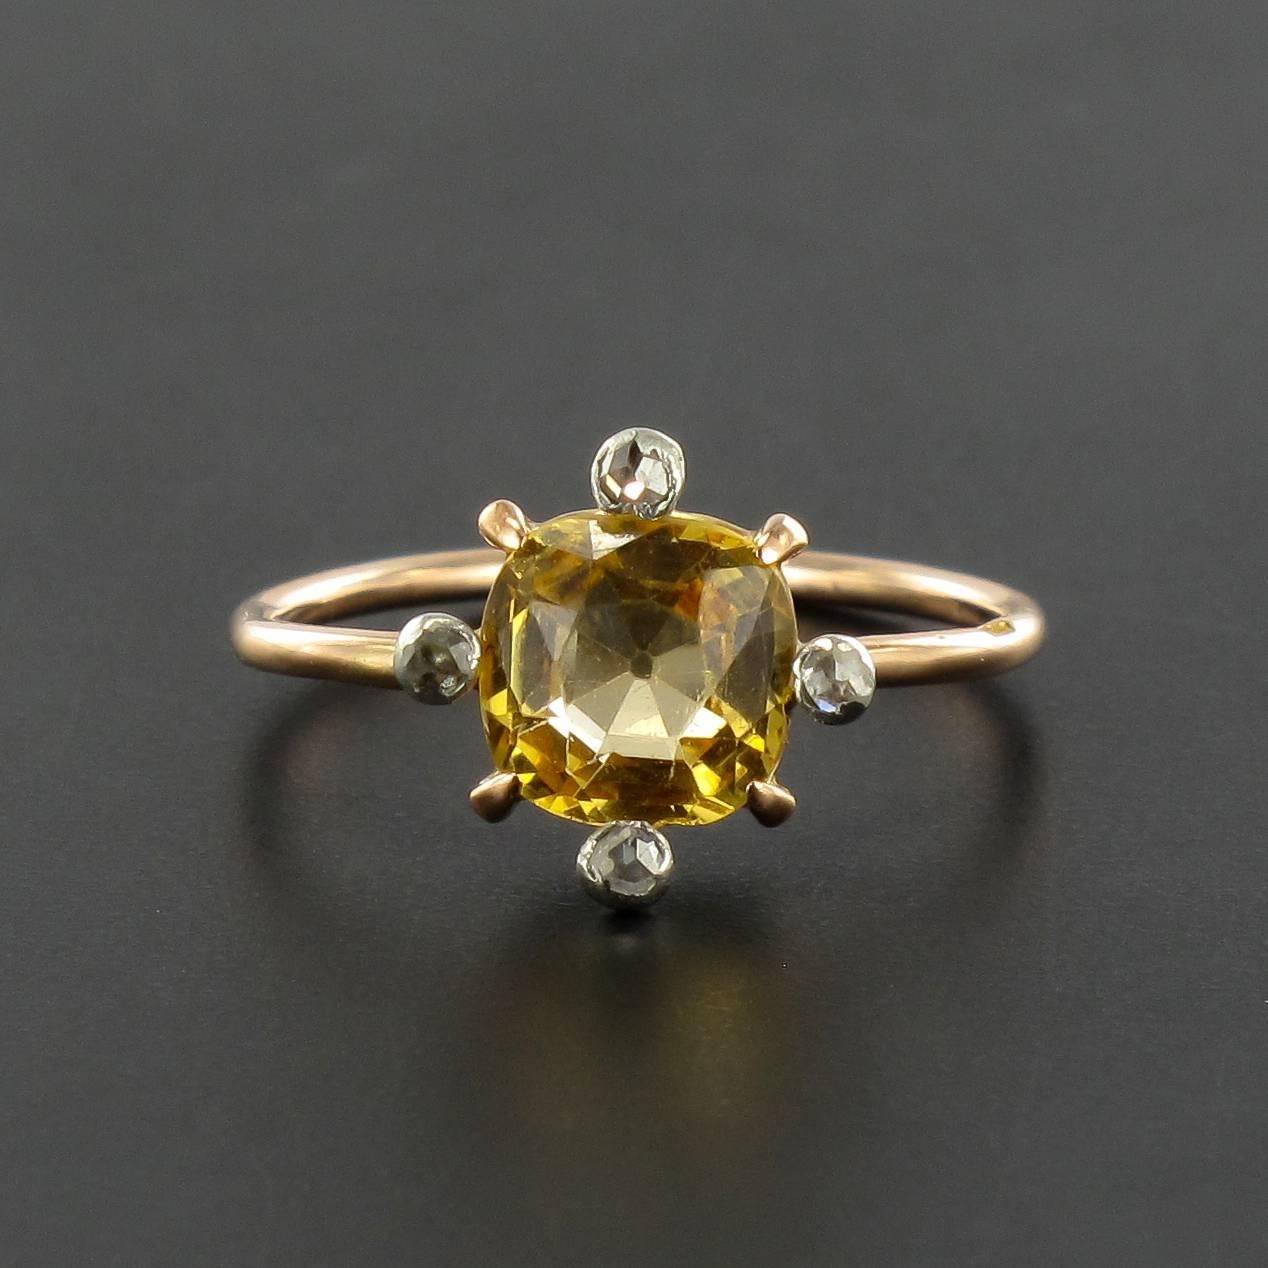 Ring in 18 carat yellow gold, eagle head hallmark. 
This gorgeous antique ring is claw set with a cushion cut topaze with rose cut bezel set diamonds at each corner. 
Total weight of the topaz: about 0.90 carat.
Height: 9.87 mm, width: 9.83 mm,